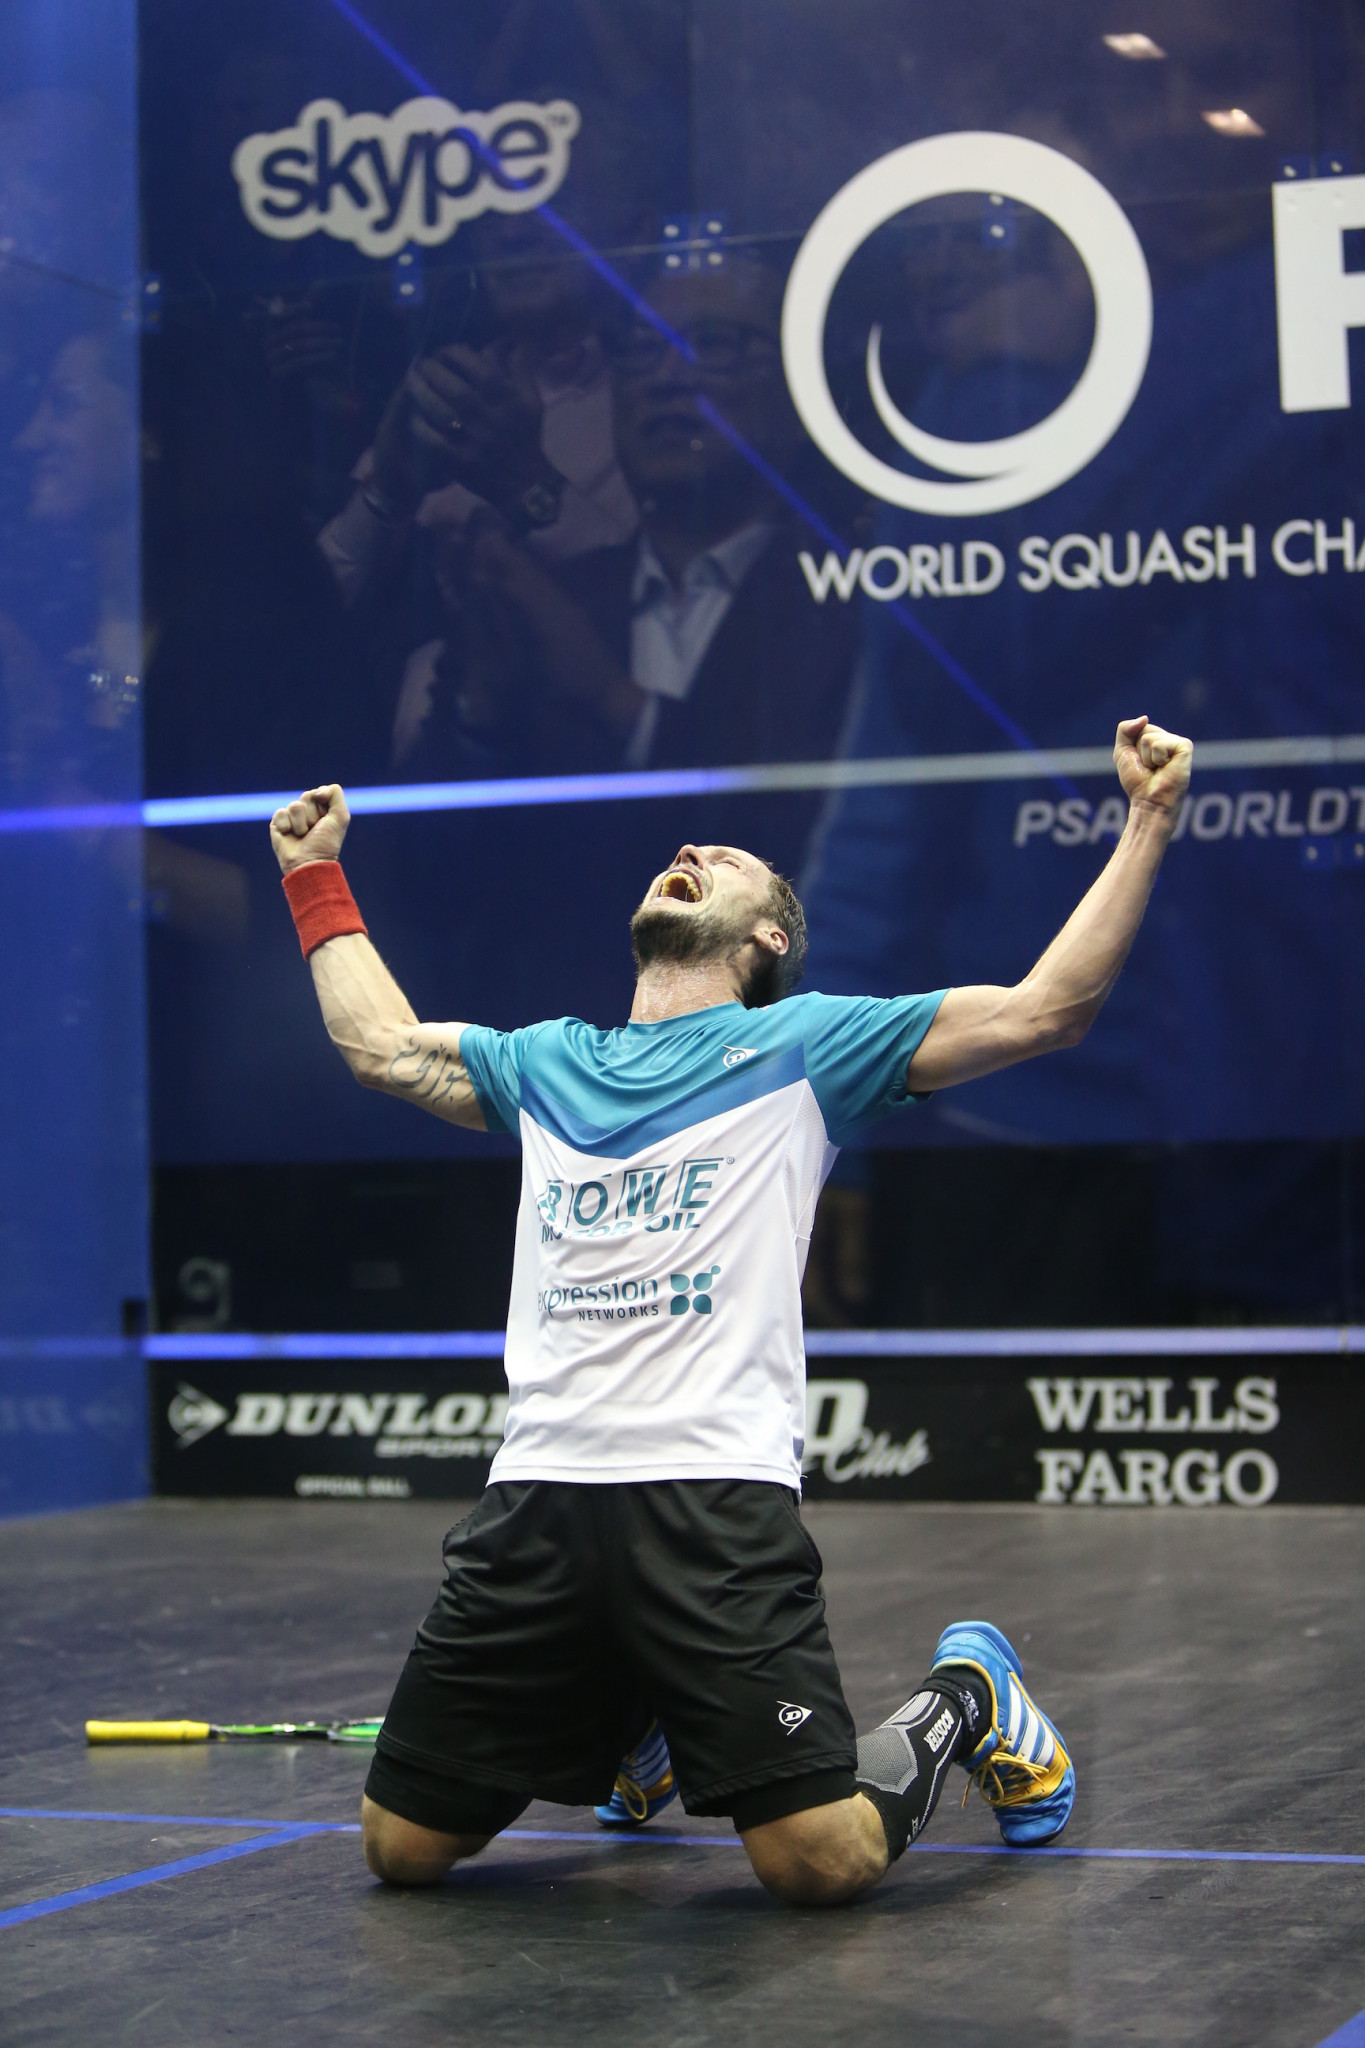 Grégory Gaultier won the PSA World Championship title in 2015 after four consecutive defeats in finals ©Getty Images